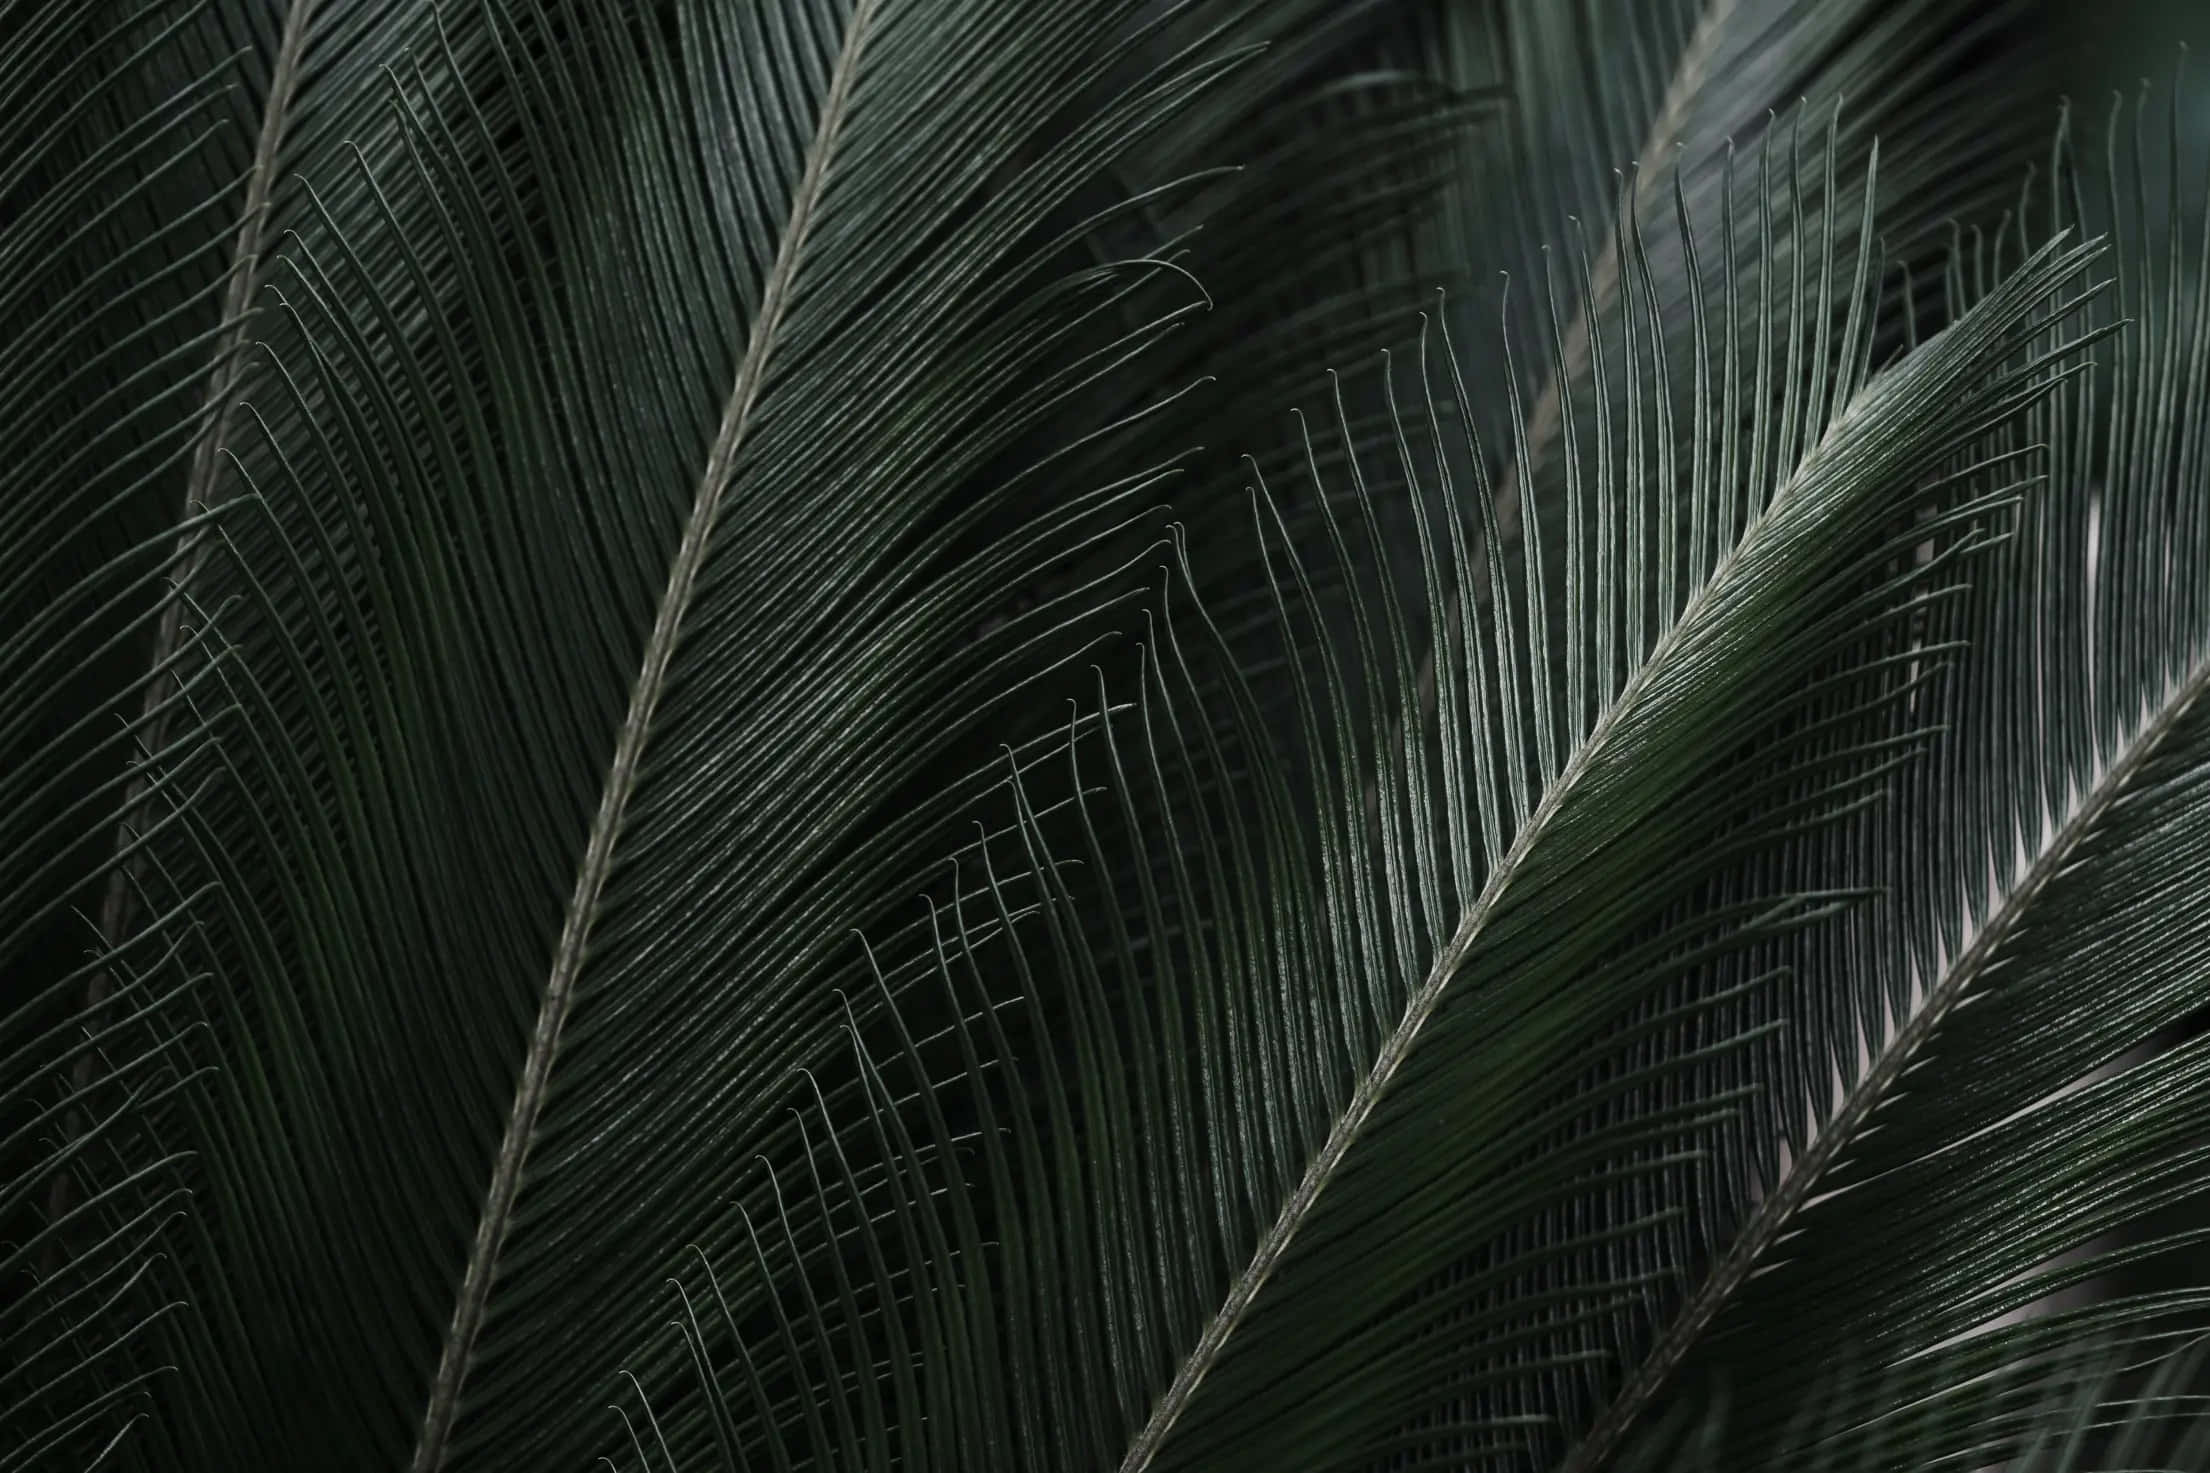 Welcome to Paradise - Close-Up of a Tropical Plant